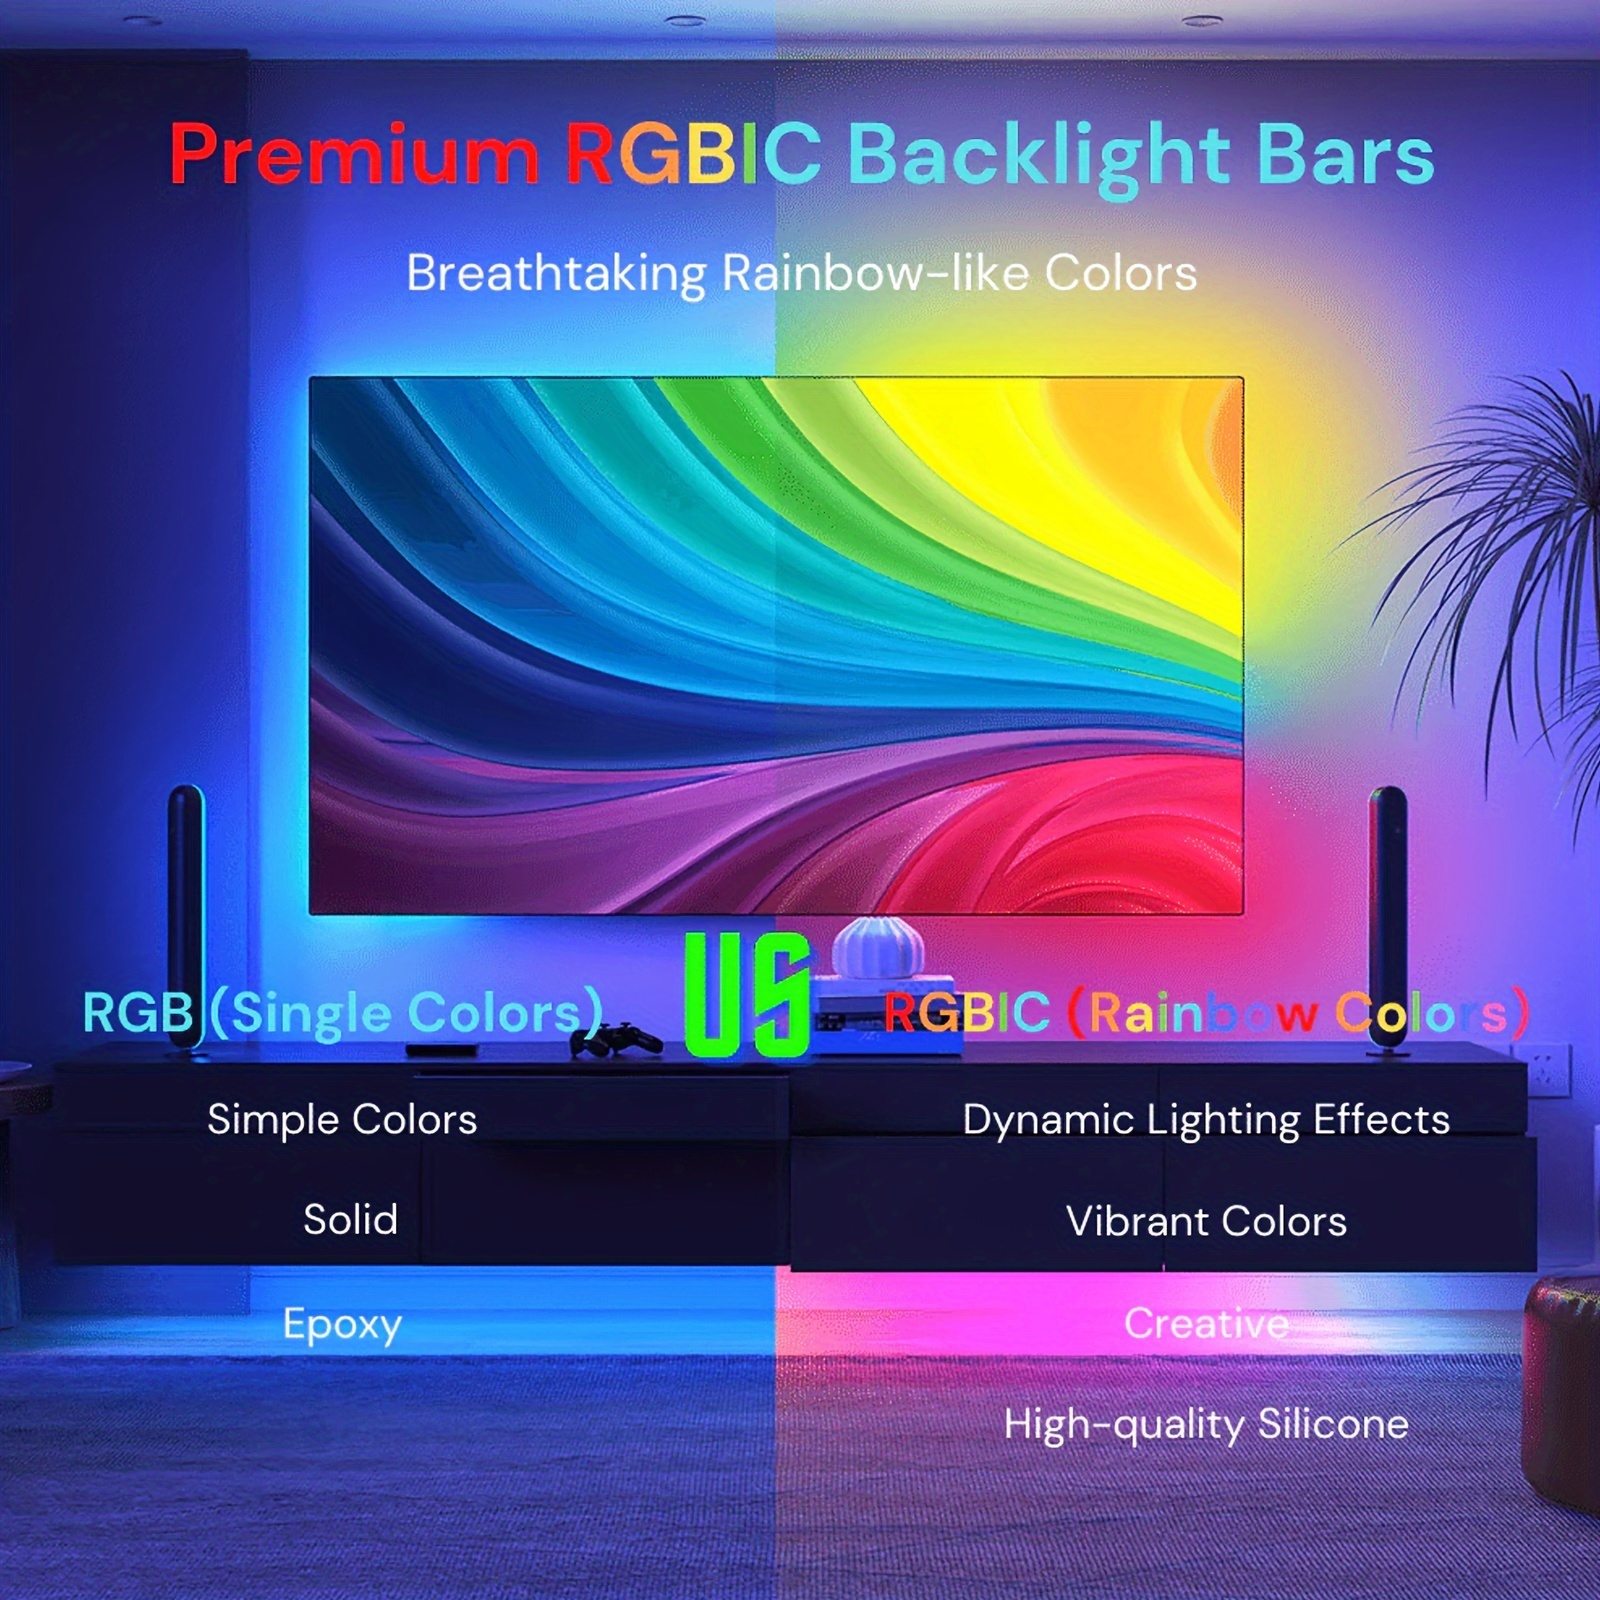 TV LED Backlight With Camera,5.0meter RGB+IC Led TV Light,For 127.0-190.5  cmTVs/PC Monitor Behind Lights, Rainbow Color Led TV BackLight,App Control,M